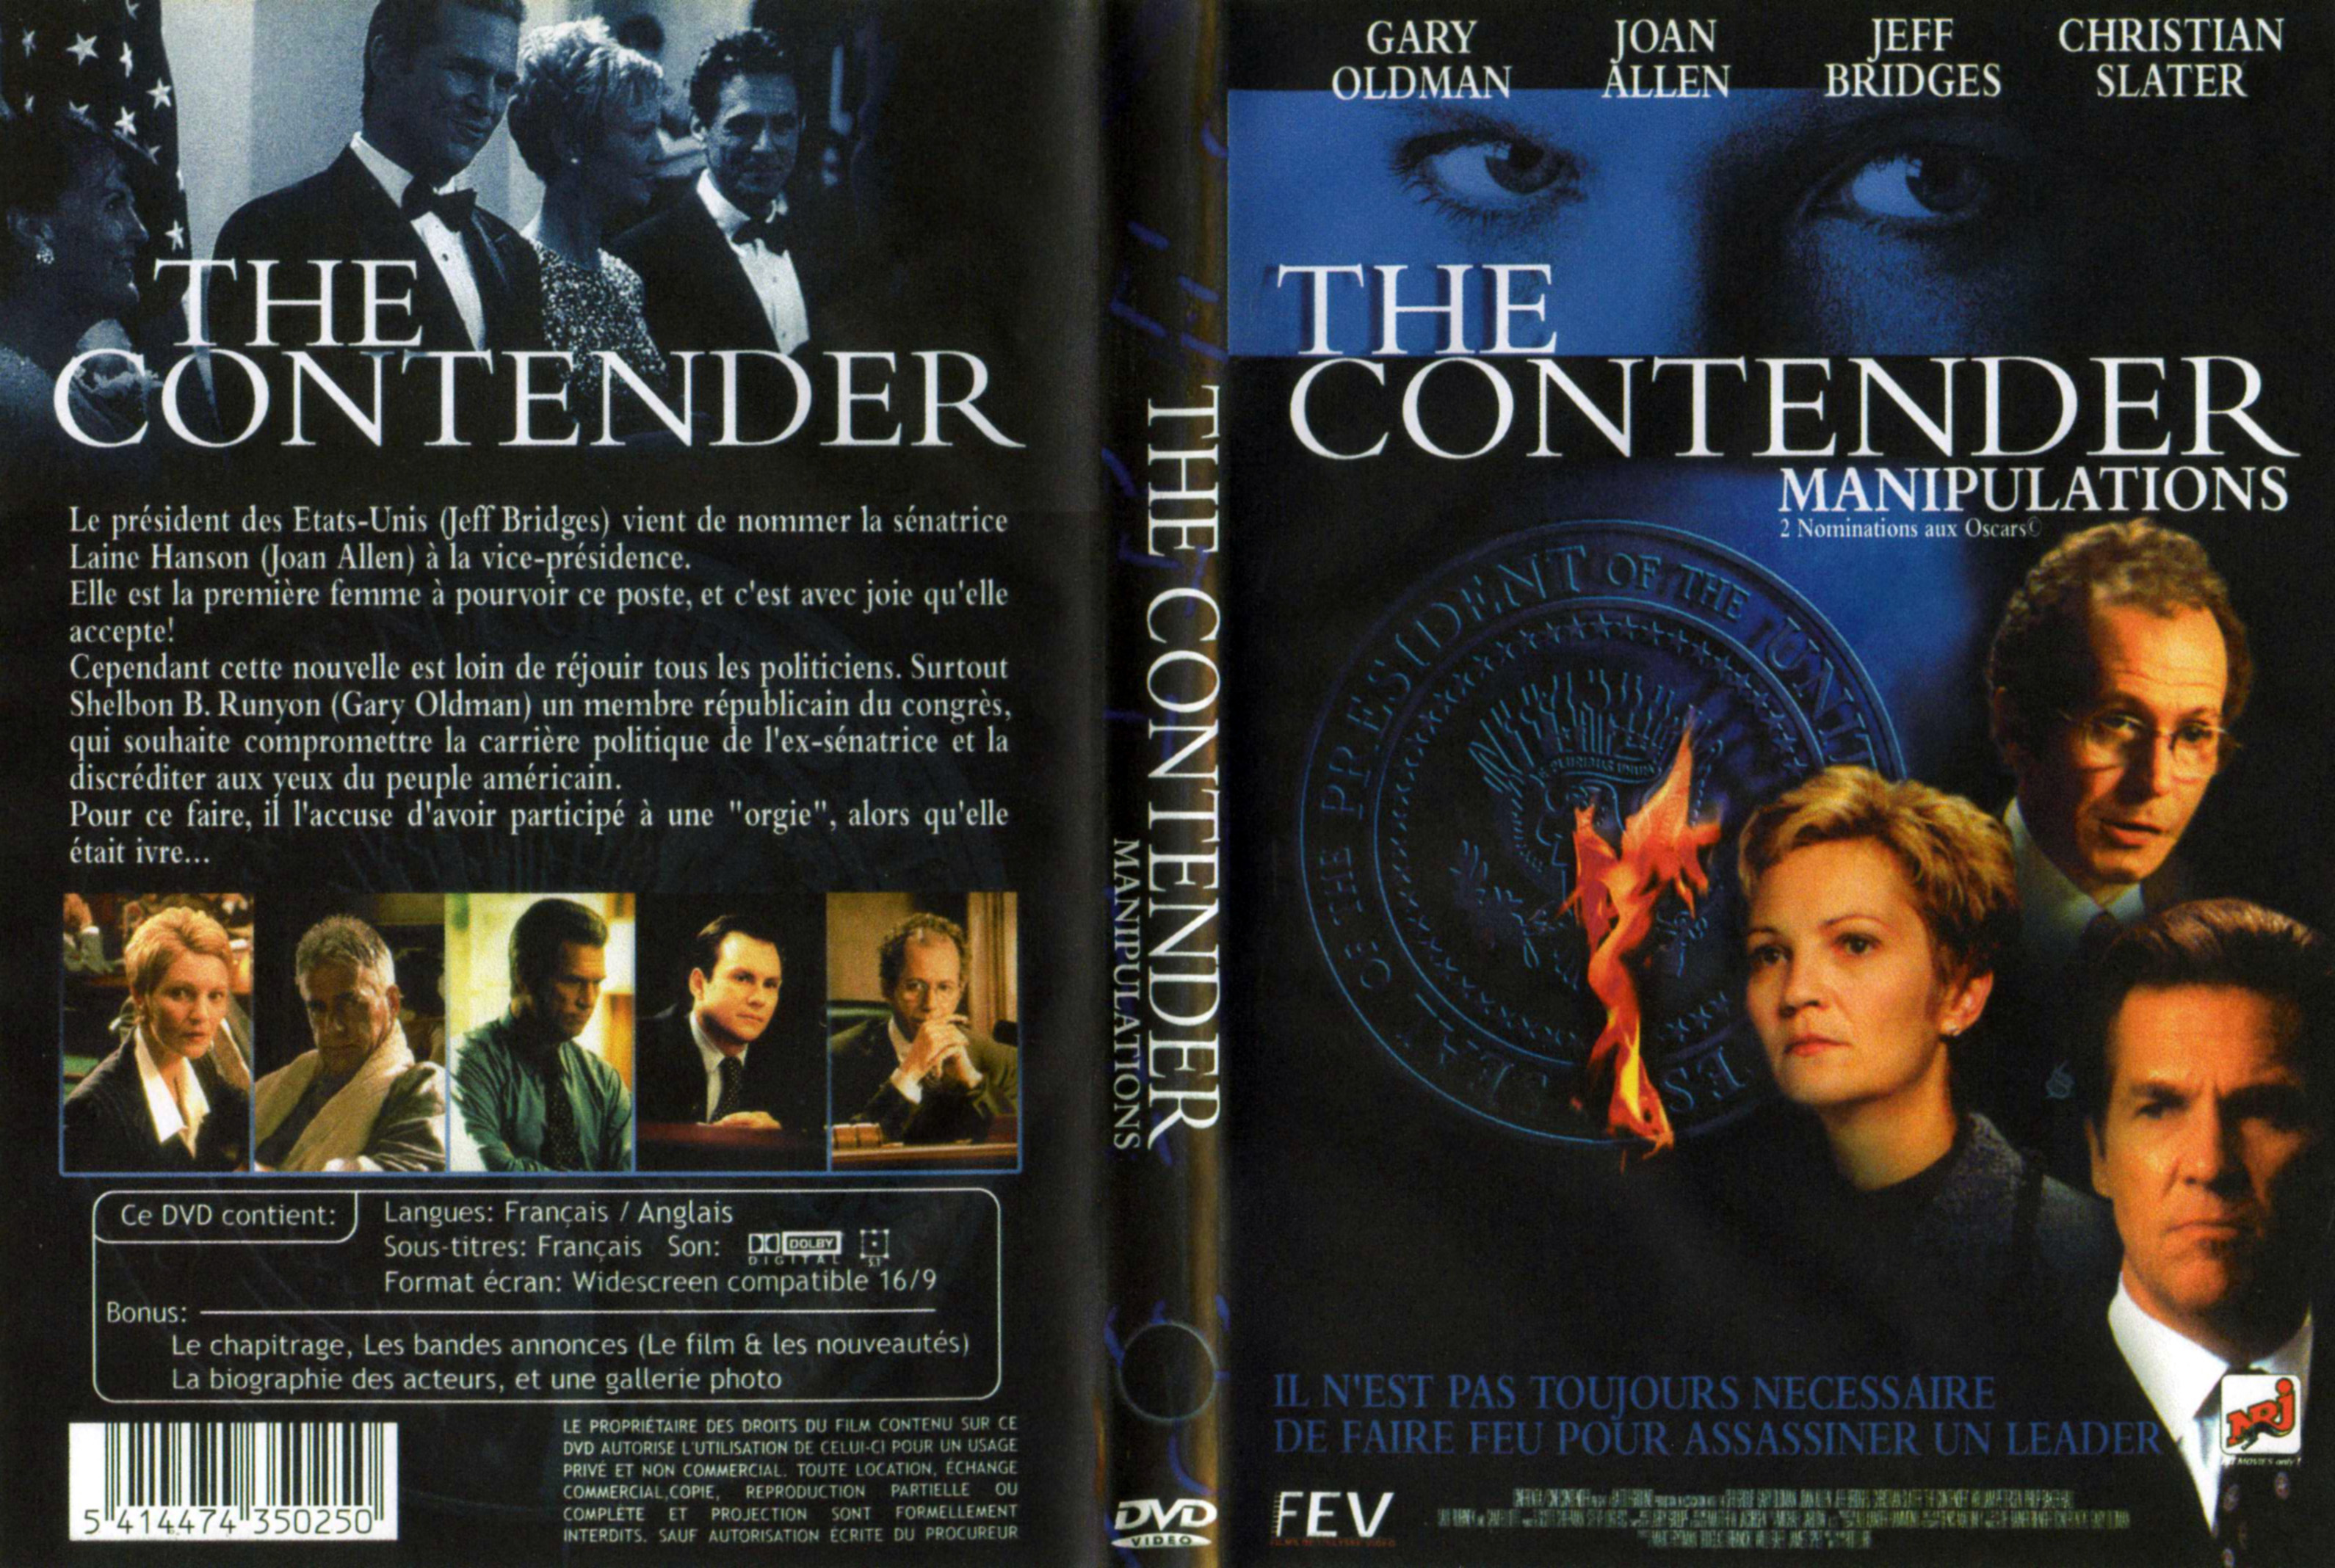 Jaquette DVD The contender